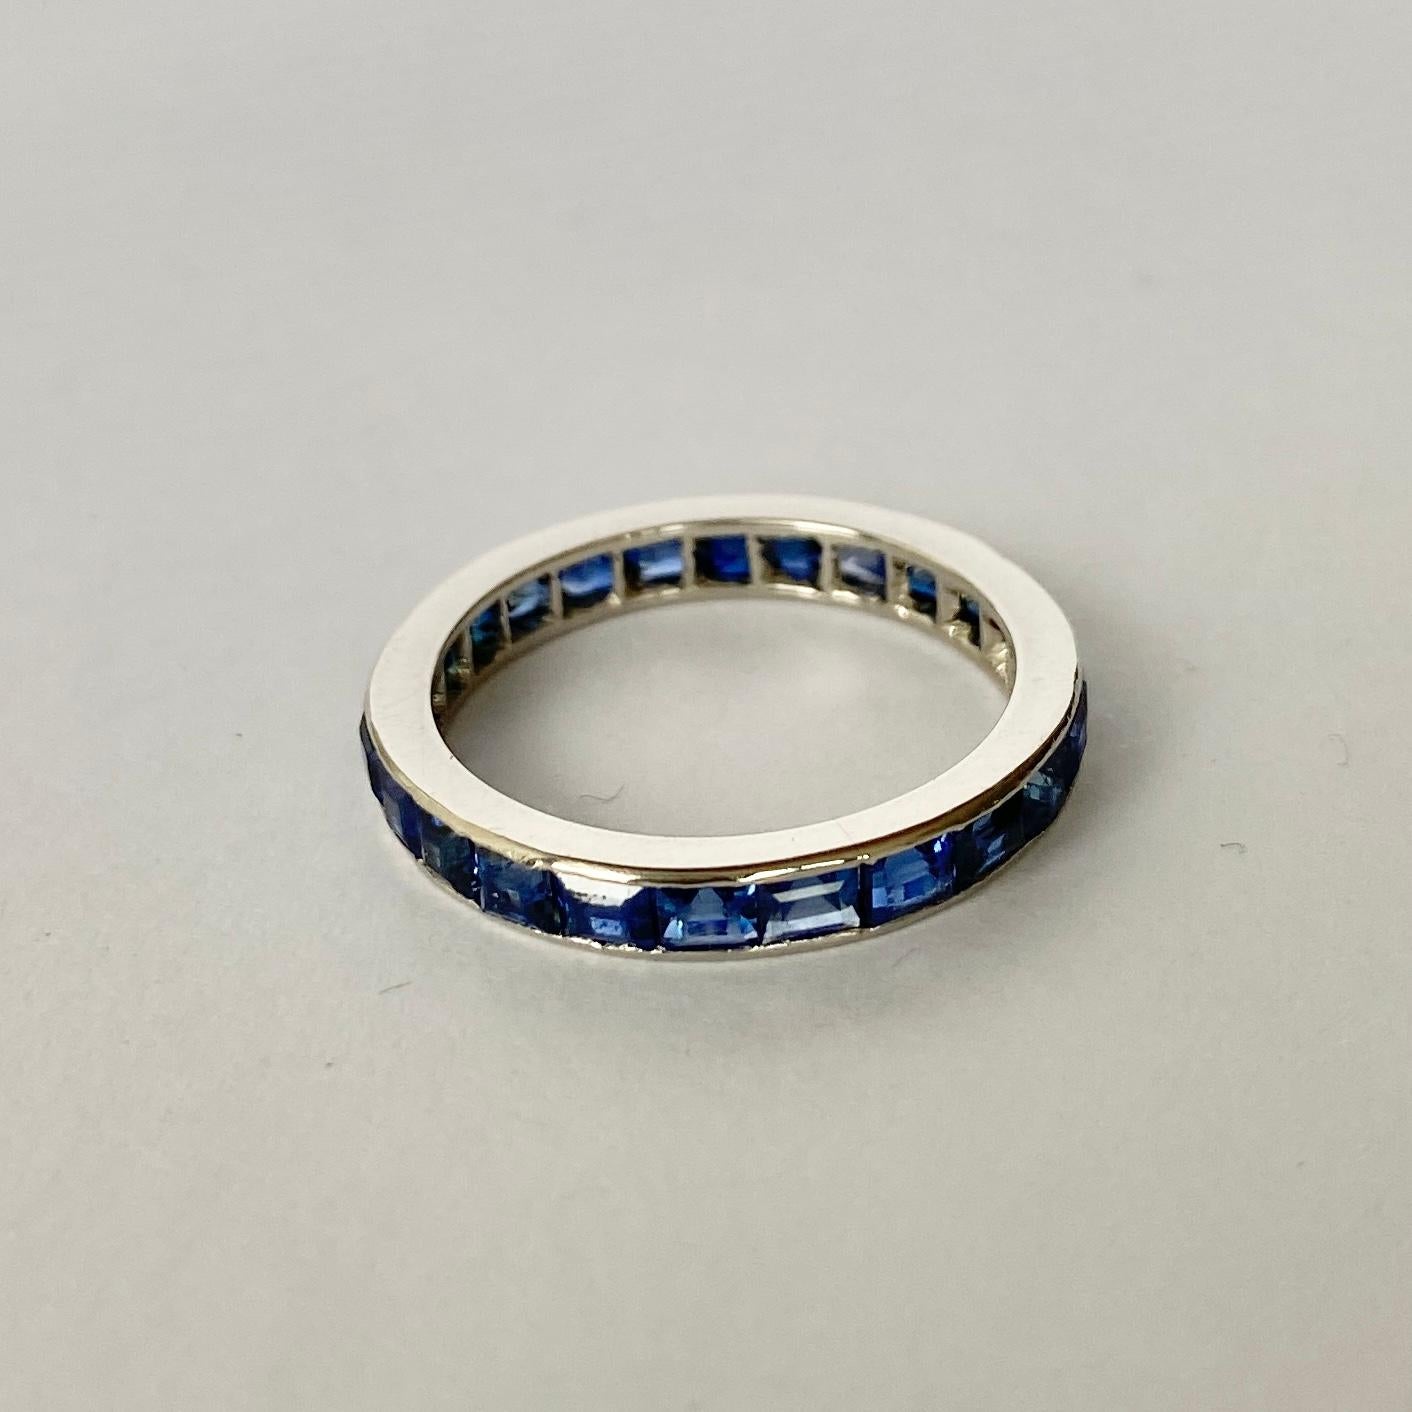 The gorgeous eternity band holds gorgeous square cut sapphires. The stones are set within a smooth platinum band. 

Ring Size: N or 6 3/4 
Band Width: 3mm

Weight: 3.3g